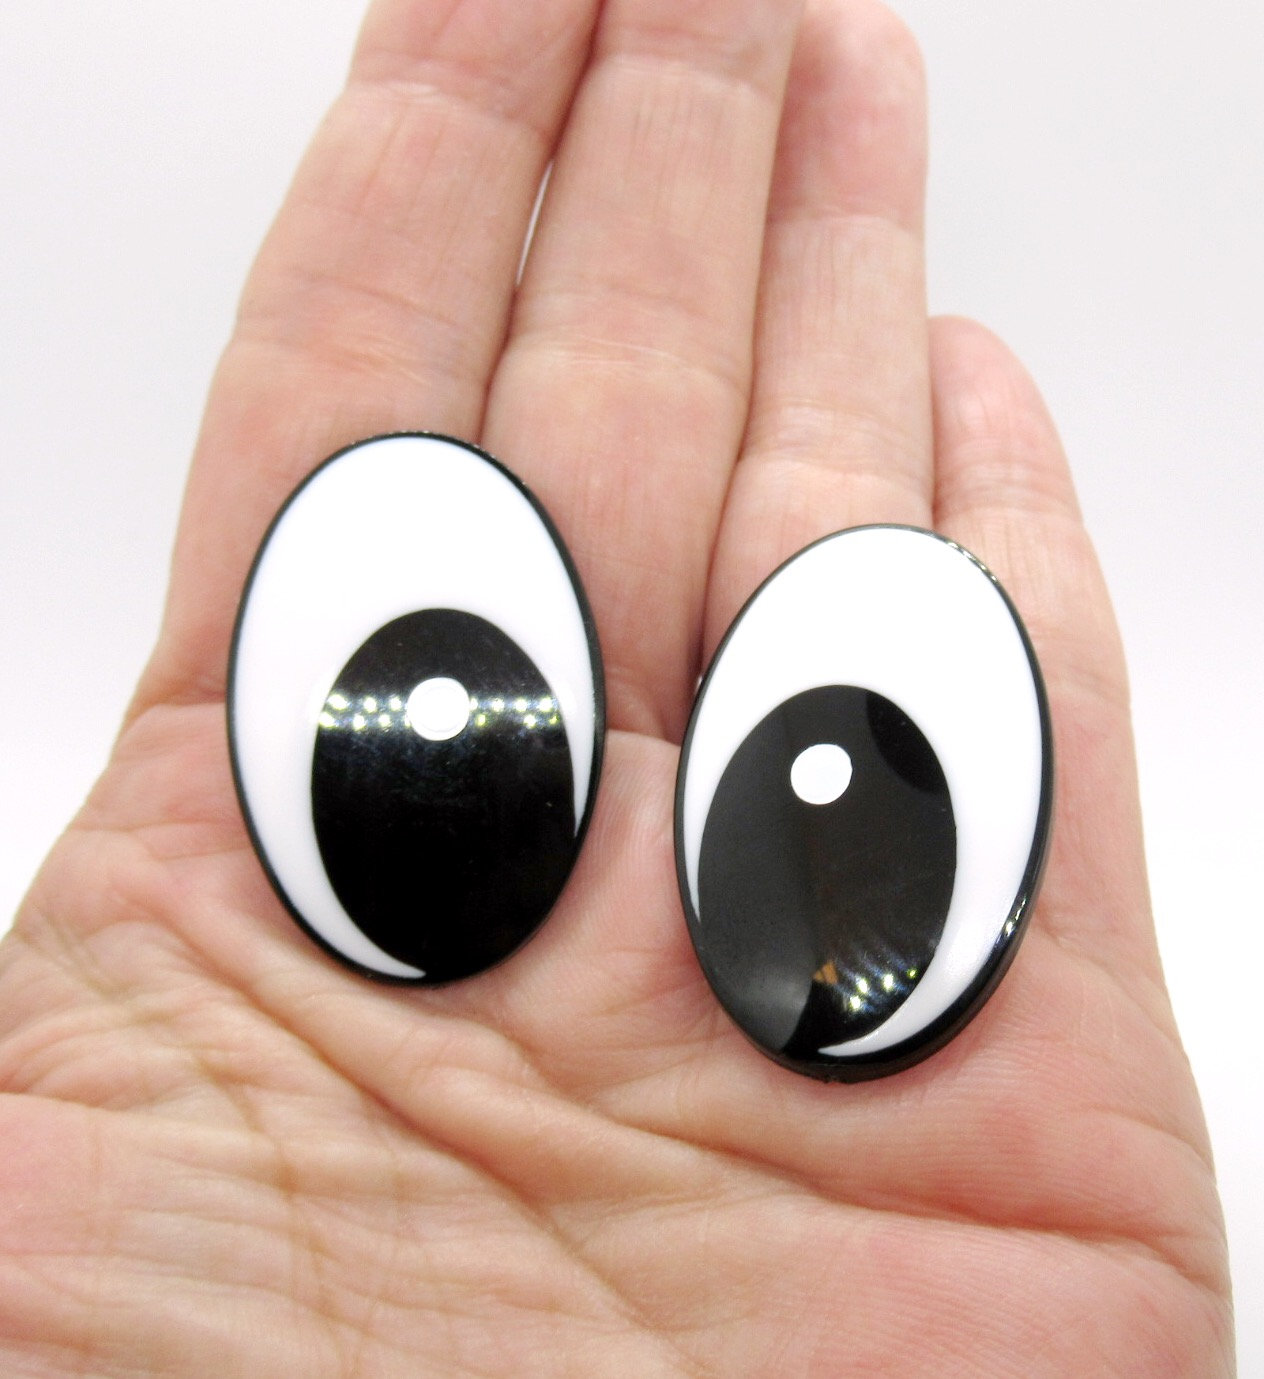 30mm X 20mm Plastic Oval Safety Eyes 1 Pair Puppet Eyes Plastic Eyes Oval  Comic Eyes Fun Eyes Black and White Eyes -  Norway